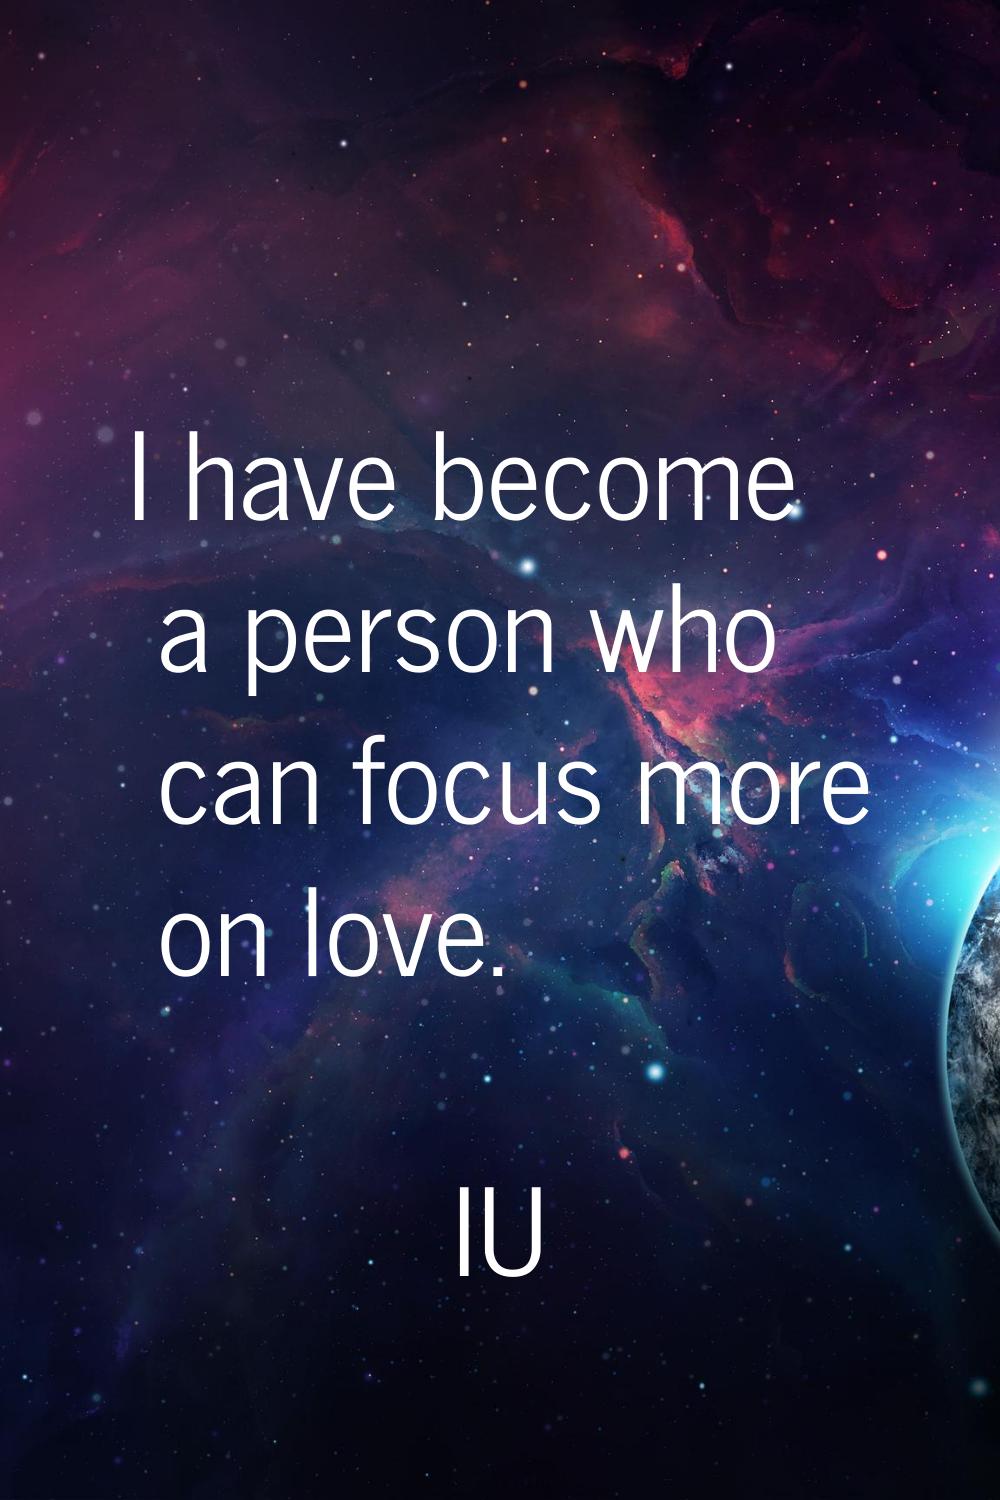 I have become a person who can focus more on love.